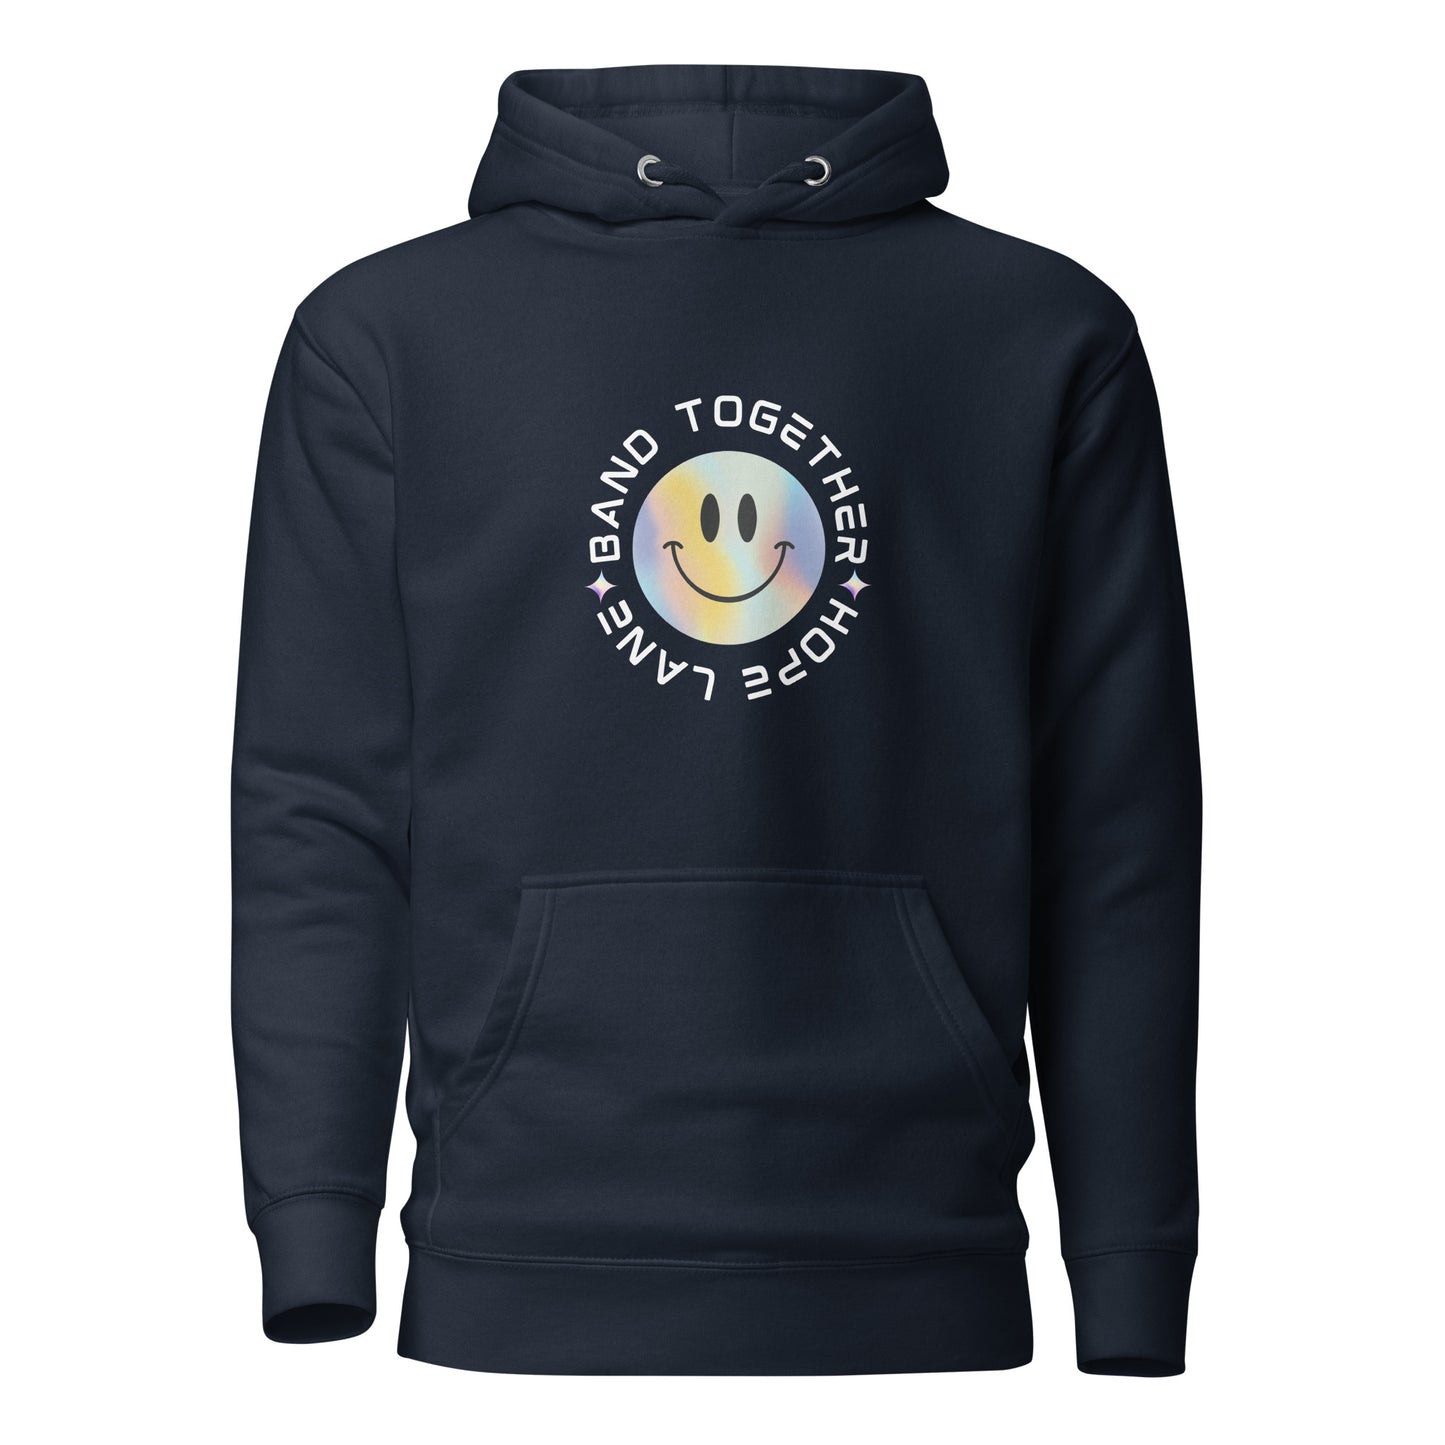 Band Together Unisex Hoodie (official Hope Lane merch)